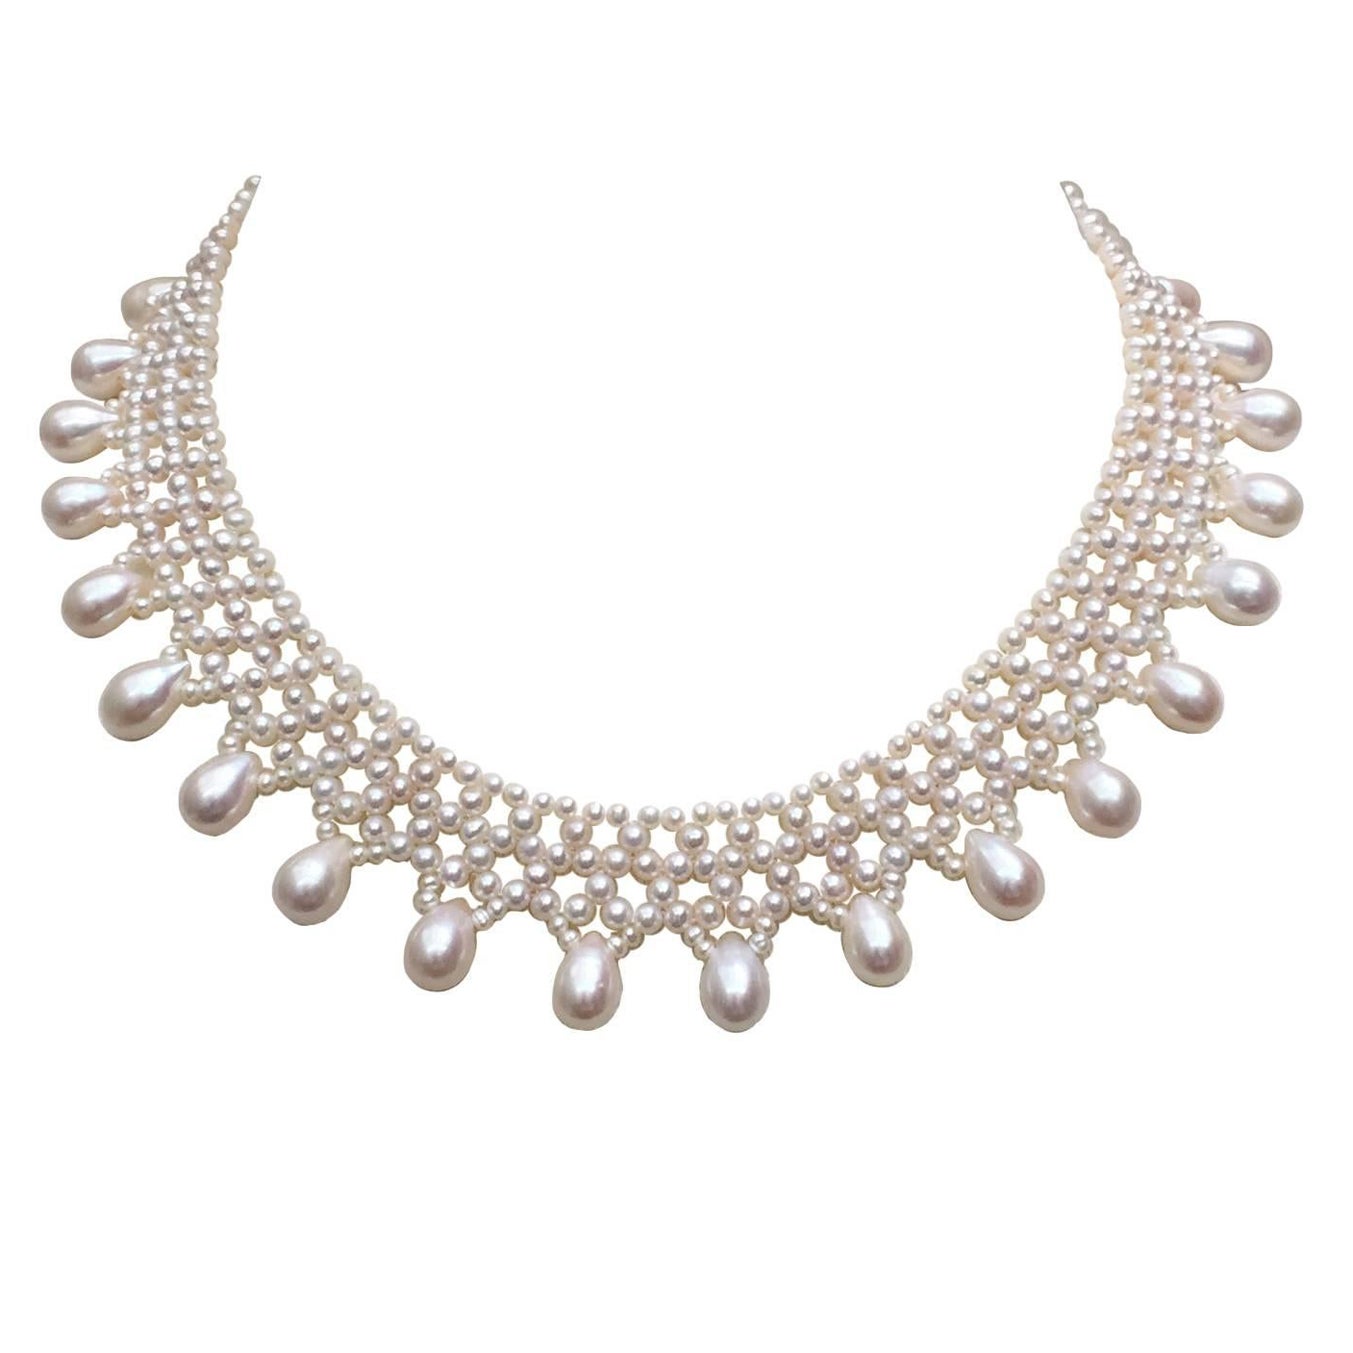   Marina J  Woven Pearl Necklace with Pear-Shaped Pearl Drops and sliding clasp For Sale